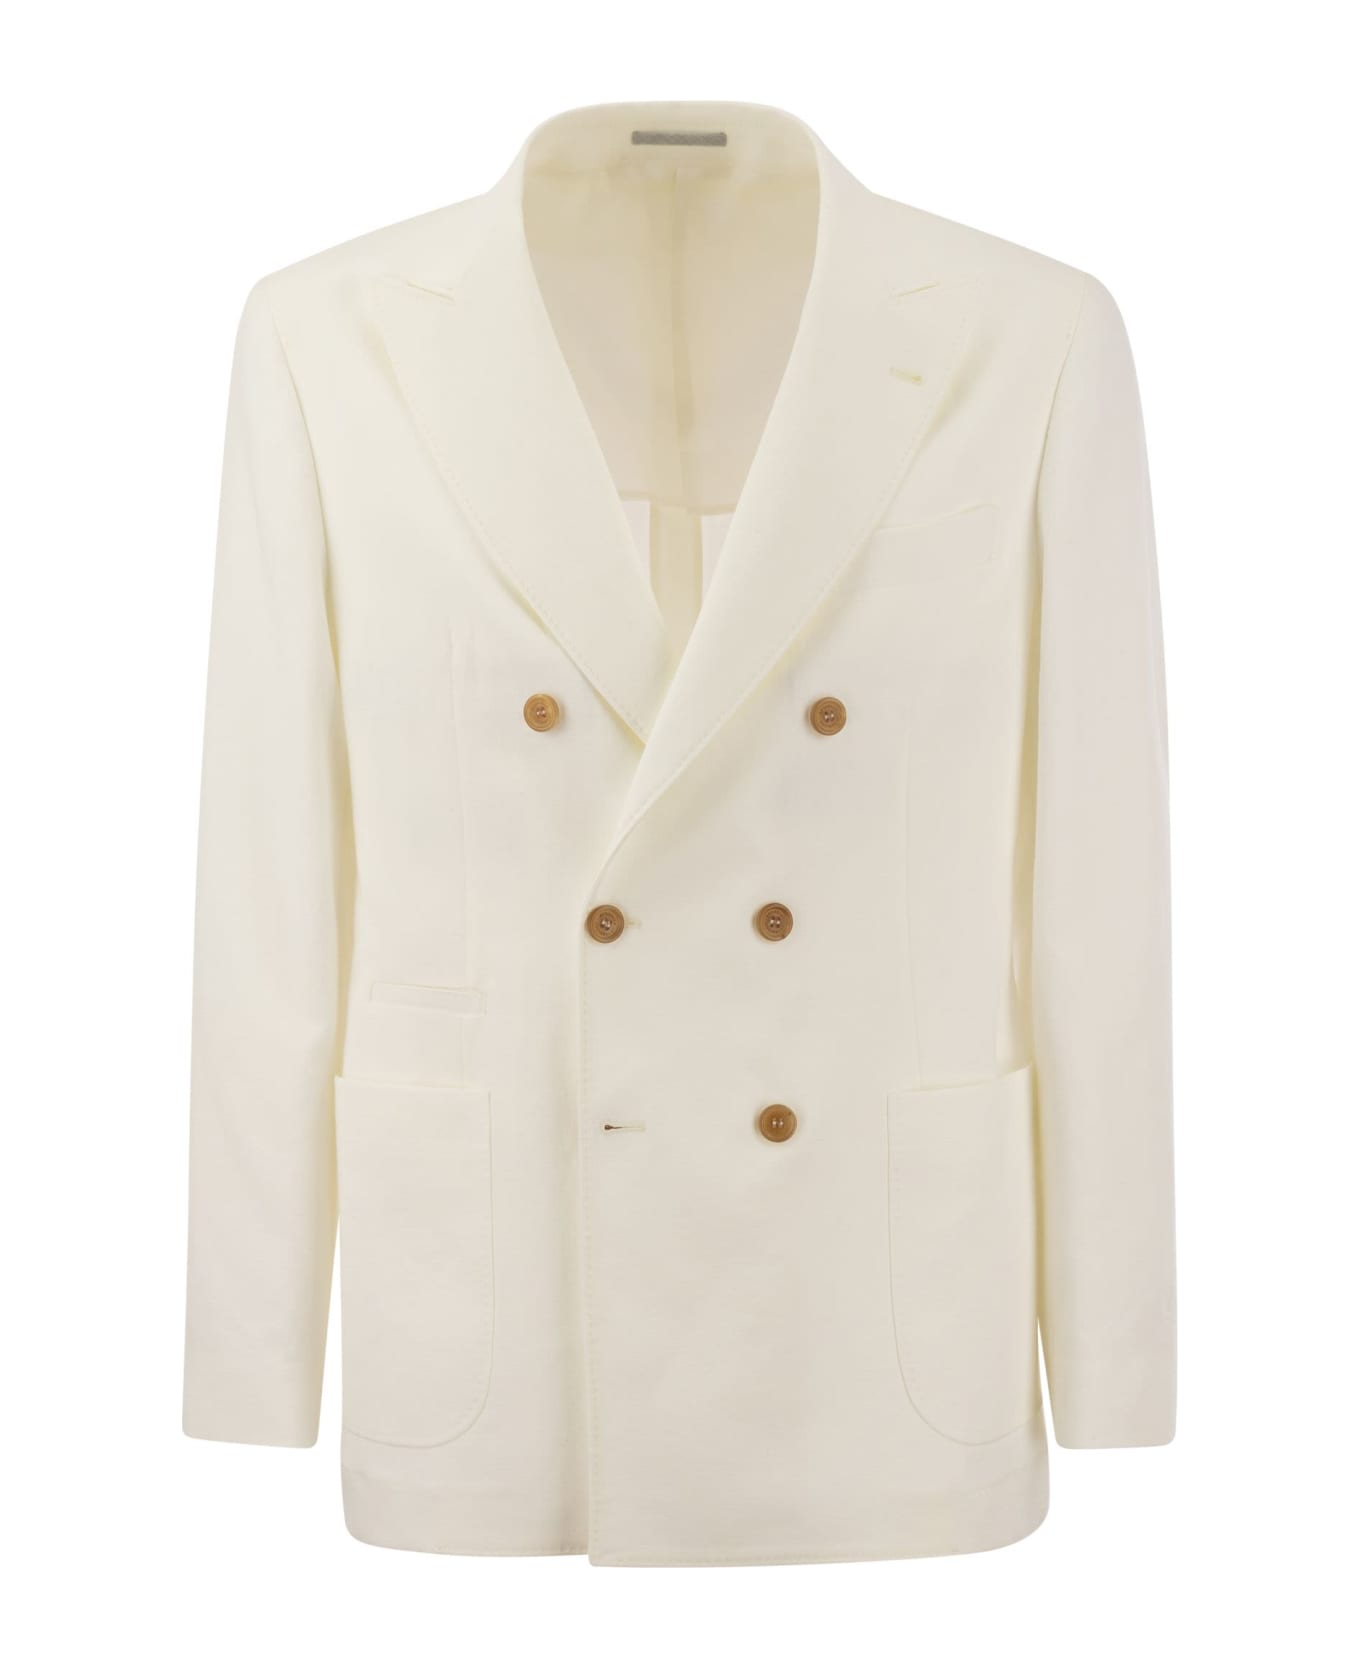 Brunello Cucinelli Twisted Linen Deconstructed Jacket With Patch Pockets - White スーツ